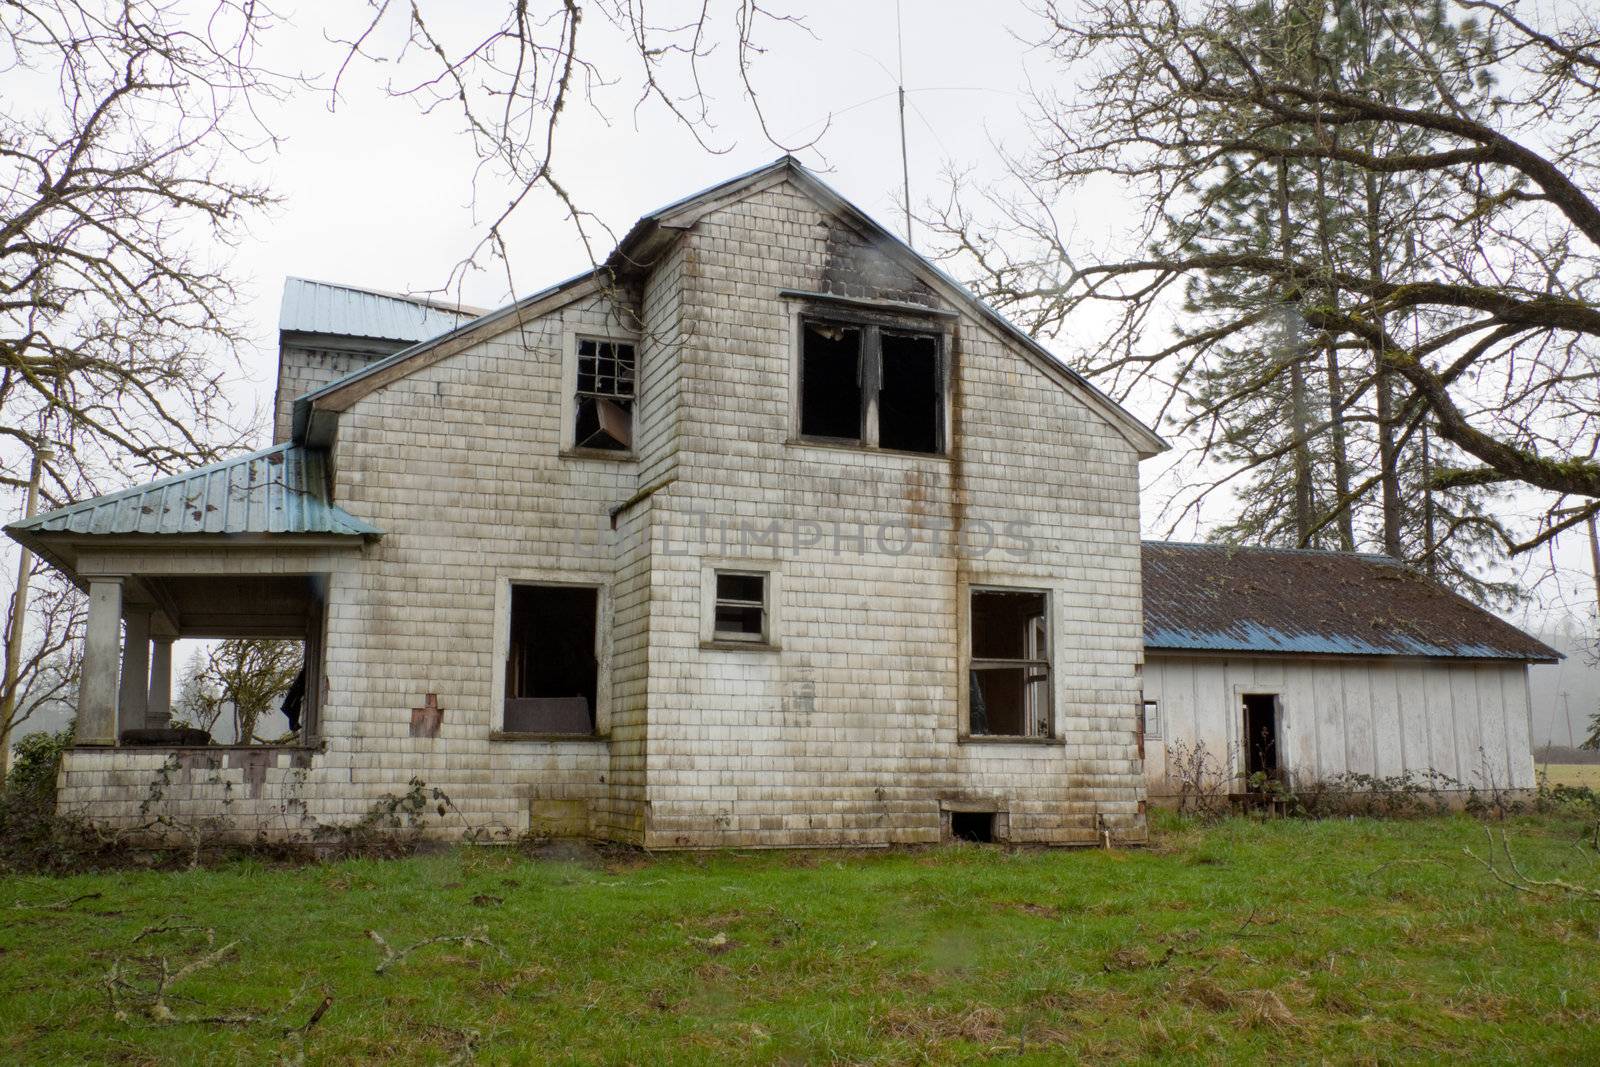 An old ranch home has been burned and abandoned.